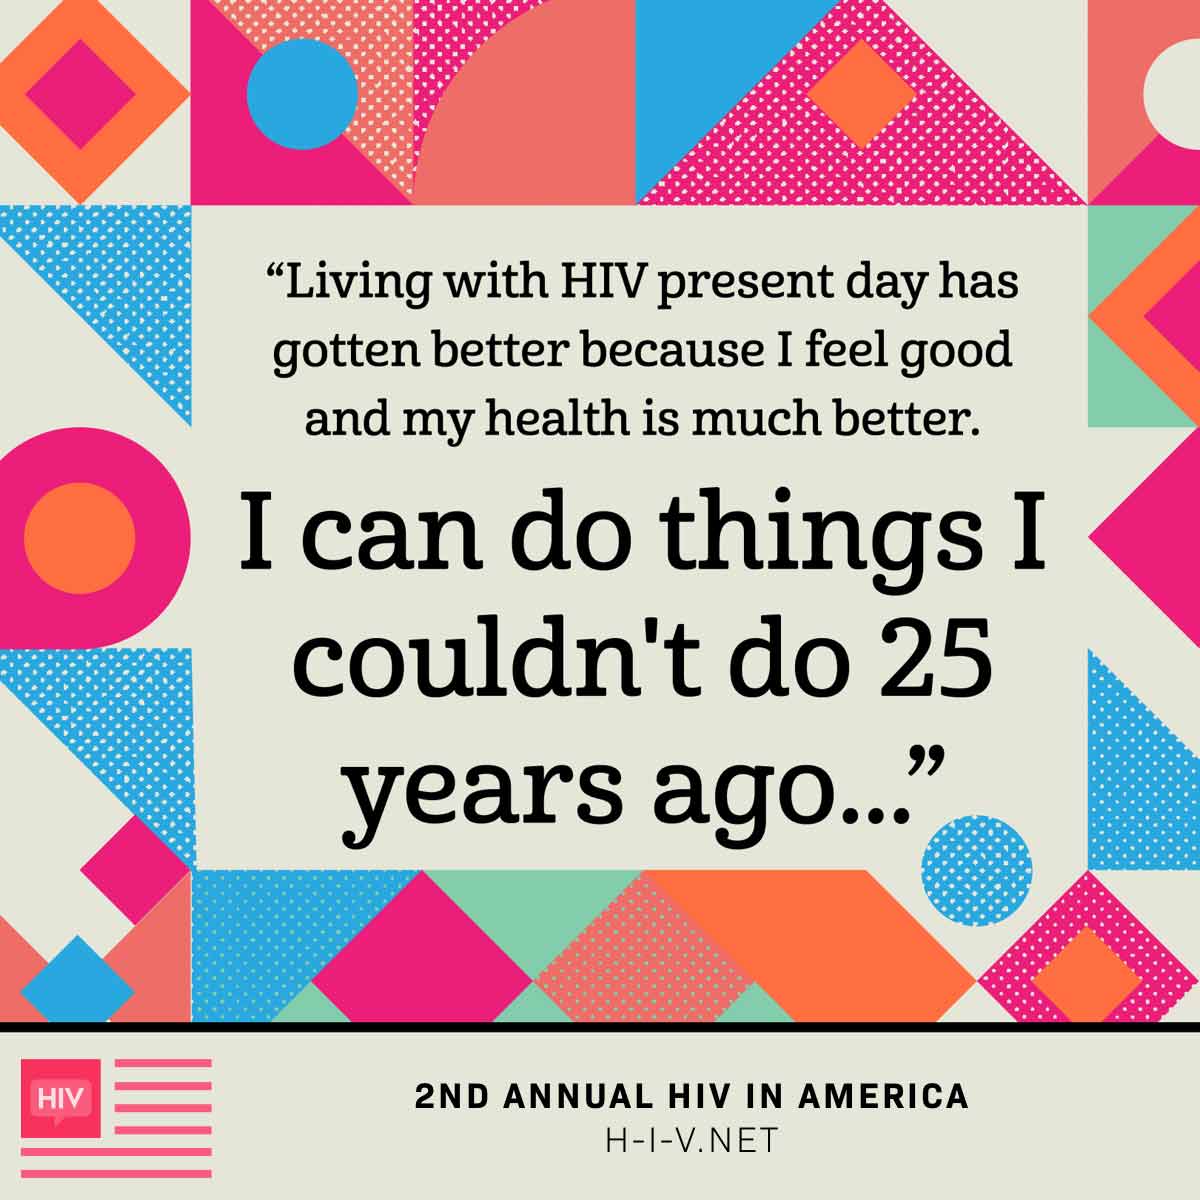 Community member quote reads: living with HIV present day has gotten better because I feel good and my health is much better. I can do things I couldn’t do 25 years ago.